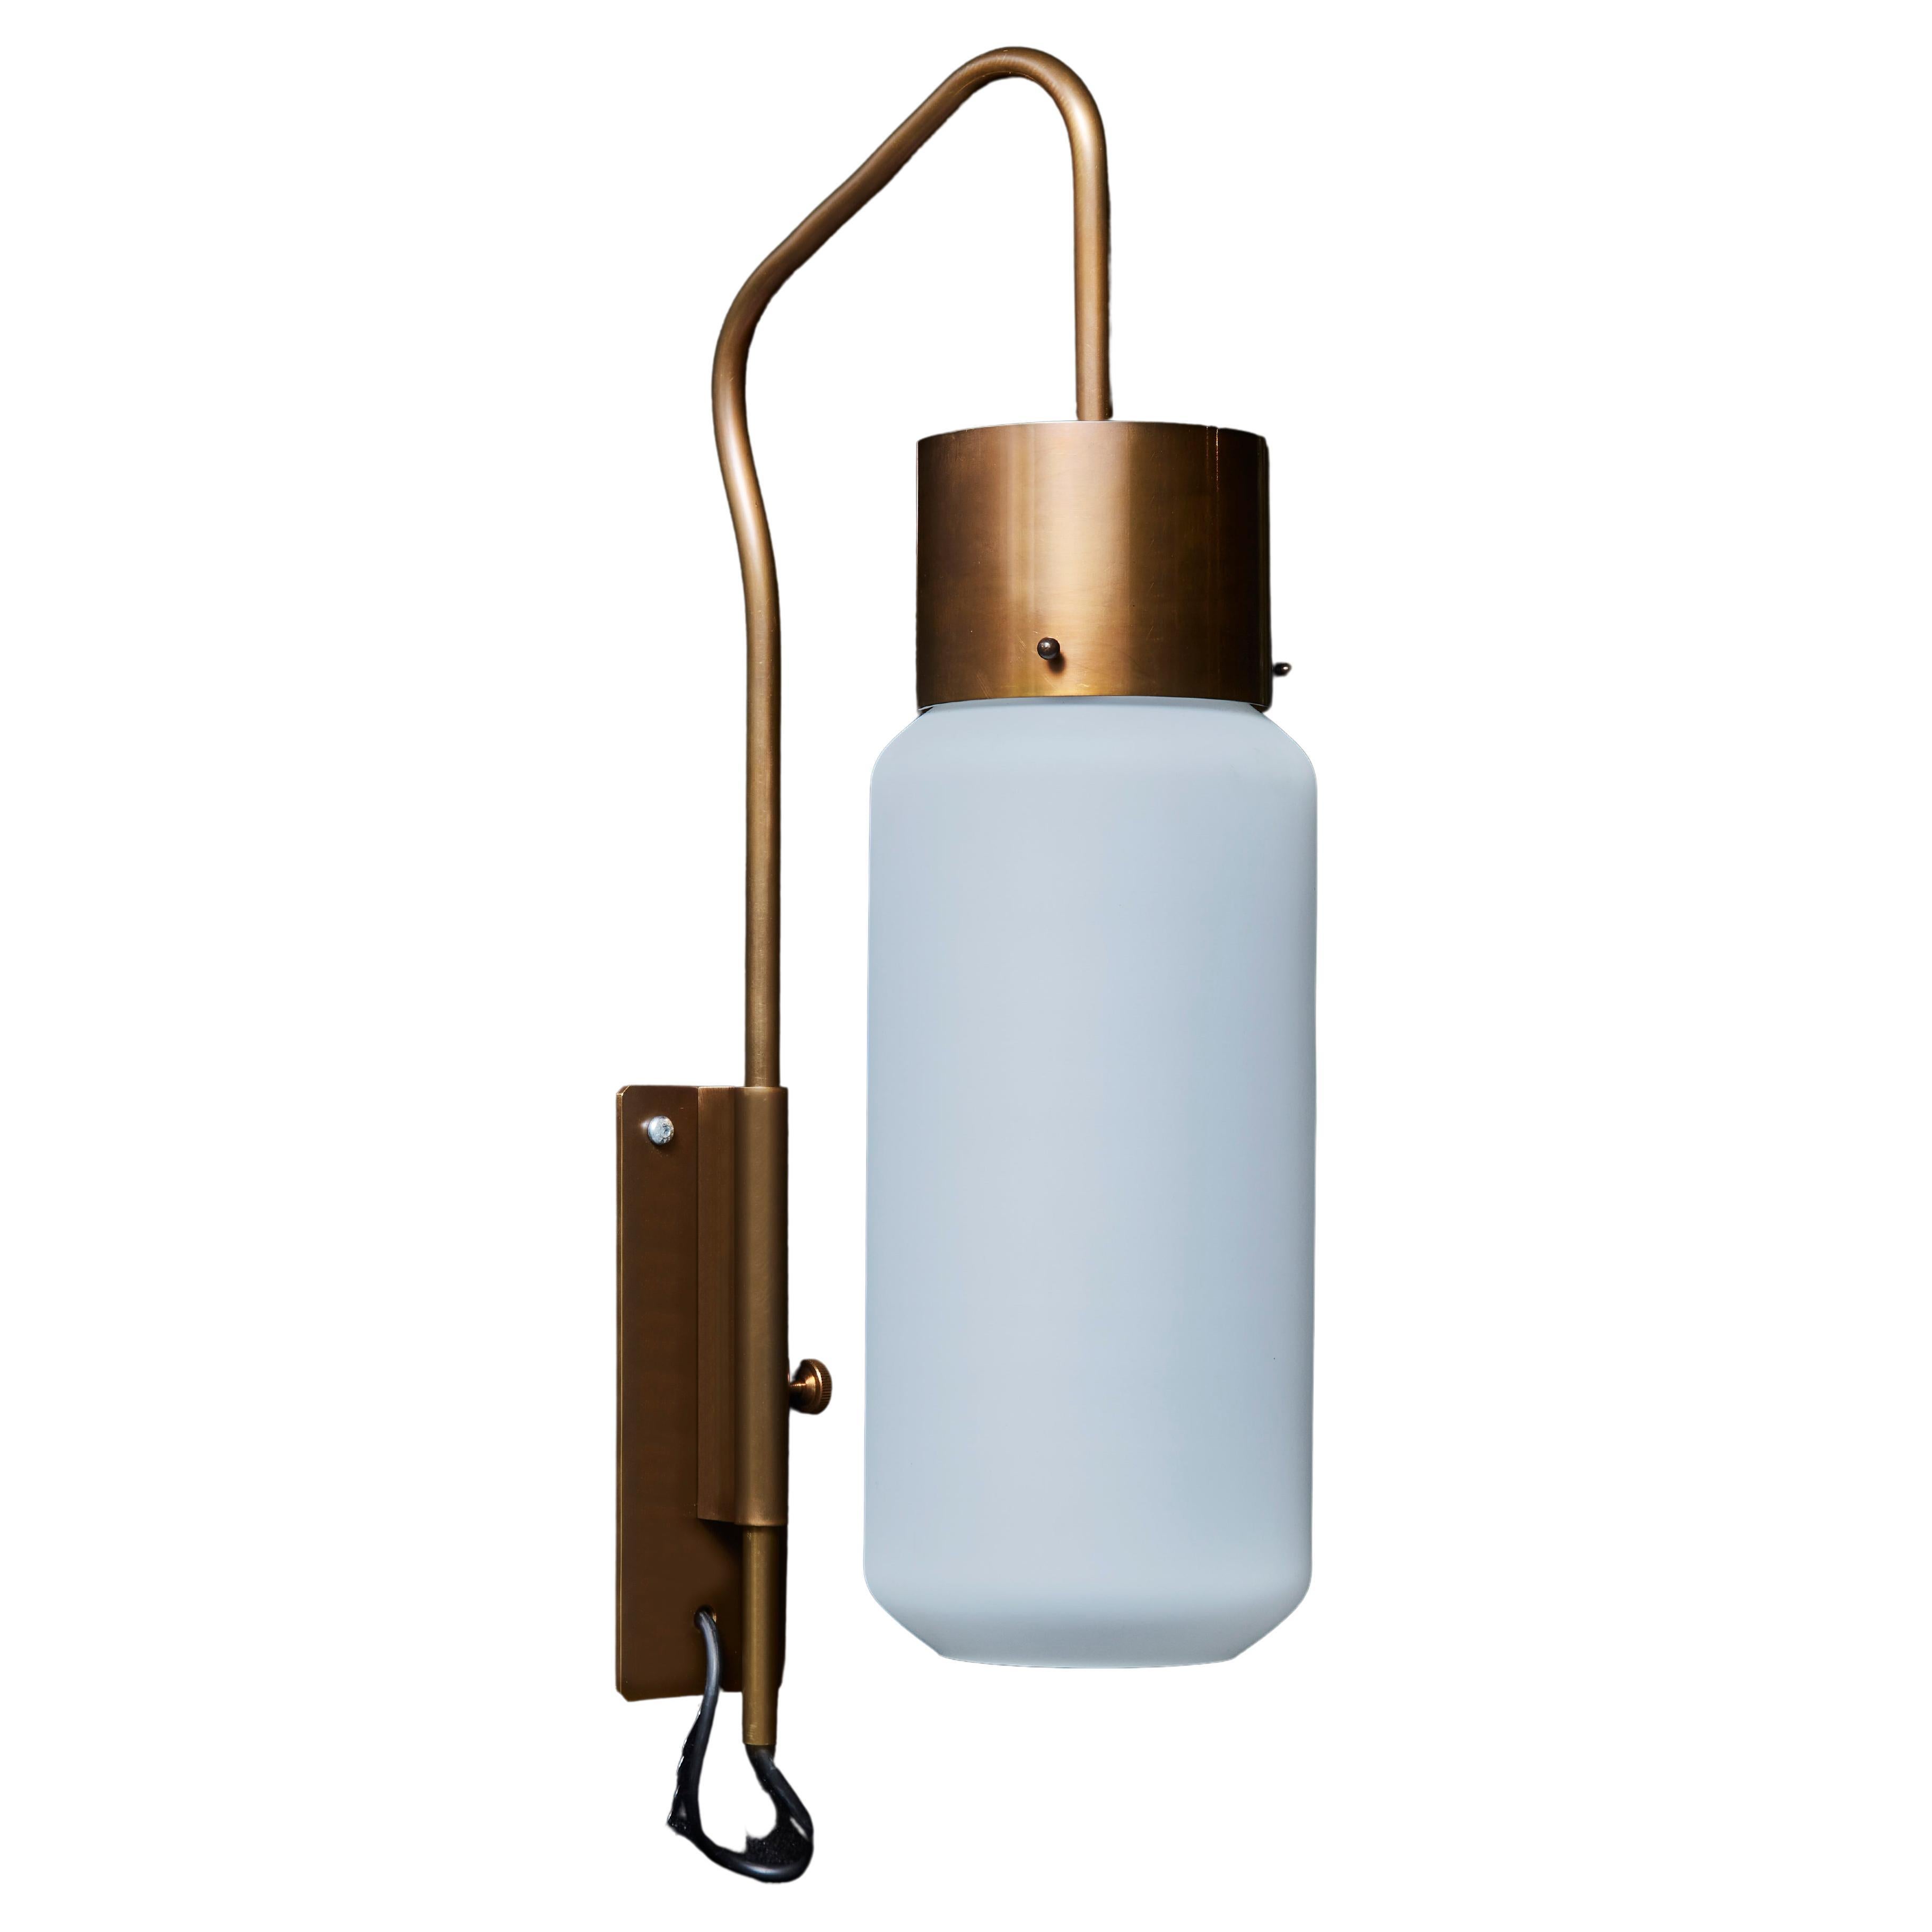 Pair of Brass Lantern Wall Sconces with Opaline Glass